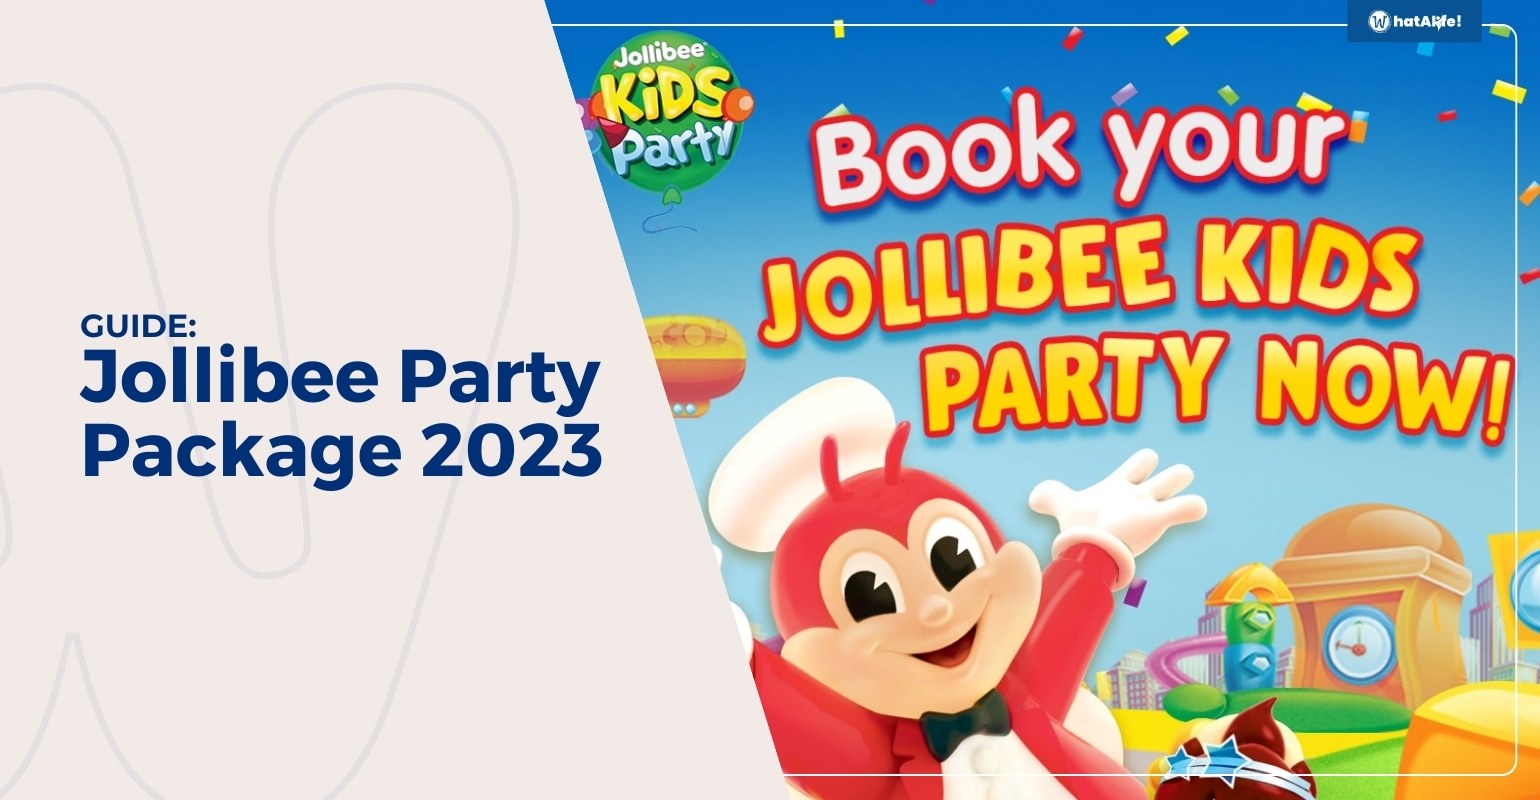 GUIDE: Jollibee Party Package 2023